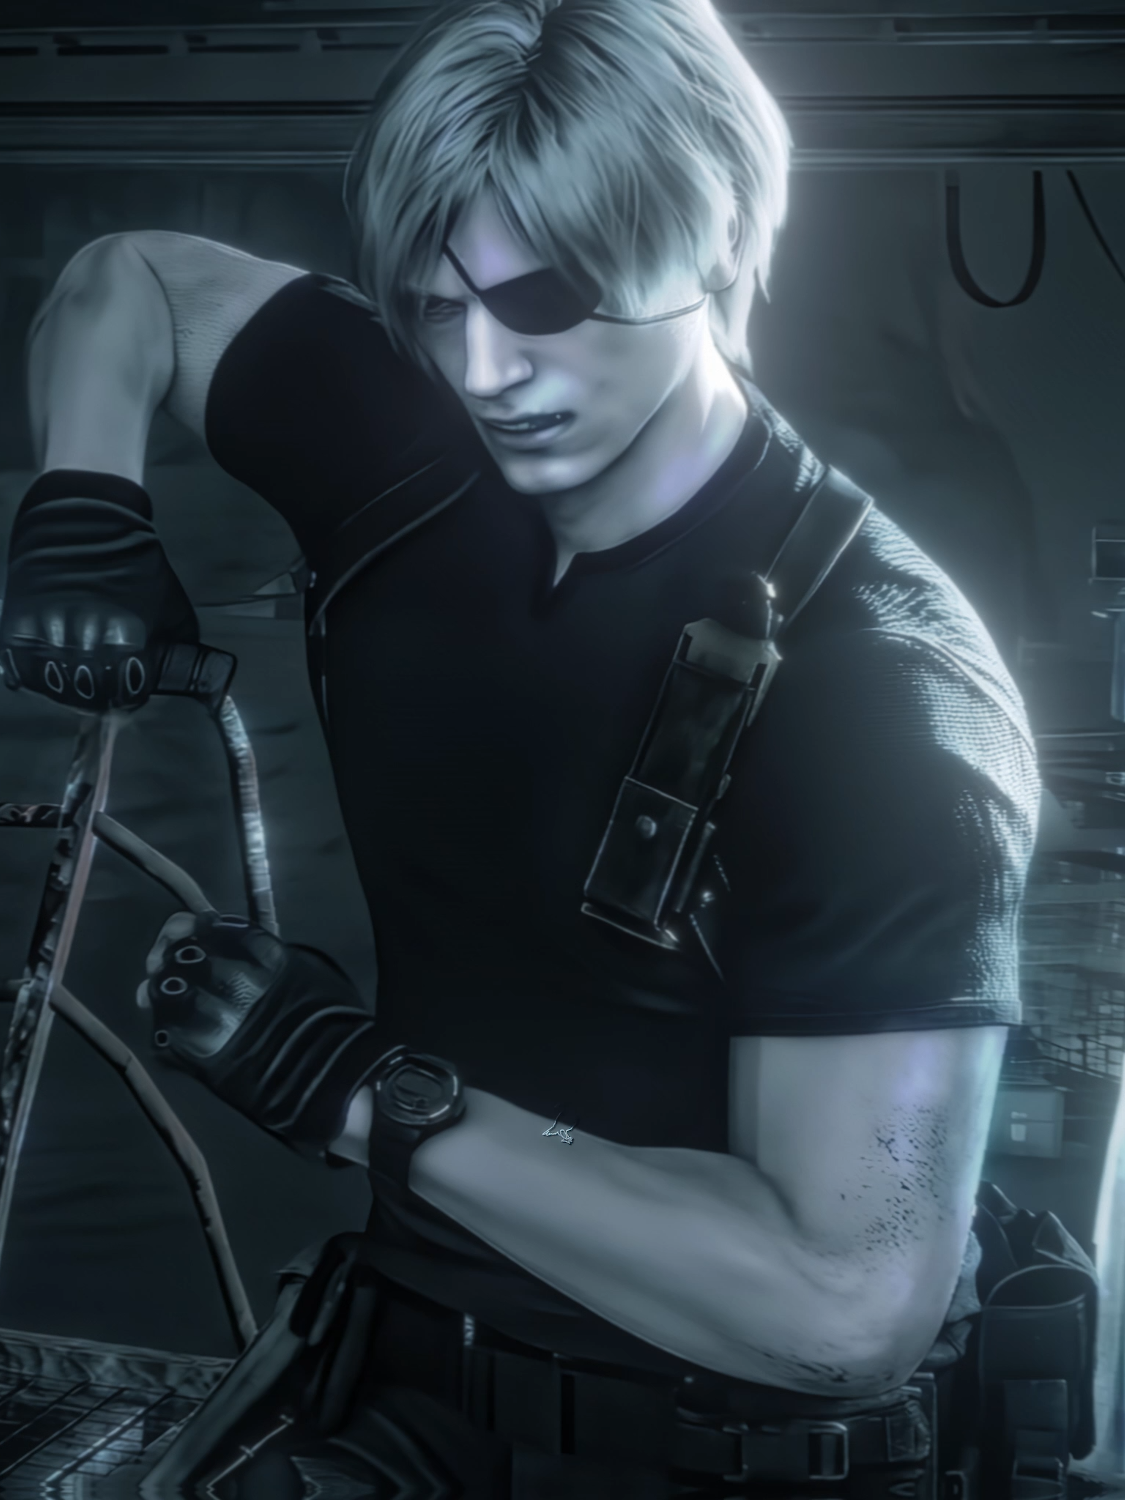 The reaper comes for the cowards and careless alike // #leonkennedy #leonkennedyedit #leonkennedyedits #residentevilvillage #residentevil #residentevil3 #residentevil4 #residentevil4remake #residentevil8 #foryou #foryoupage #foryour #foryoupage❤️❤️ #fypage #fypシ゚viral #fyppppppppppppppppppppppp